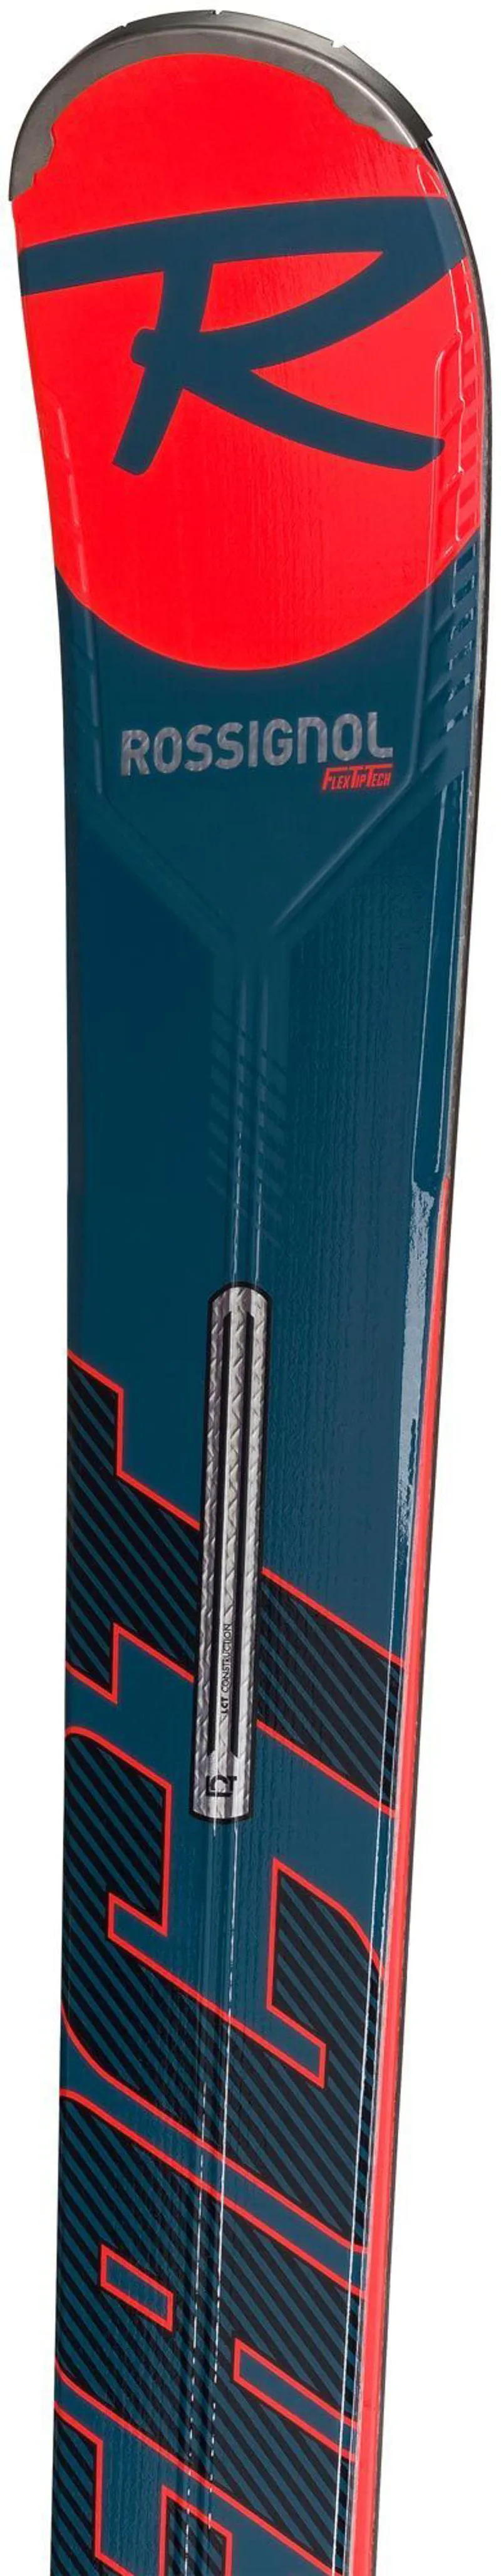 Rossignol React 6 Mens Piste Skis 2020 with Xpress Bindings